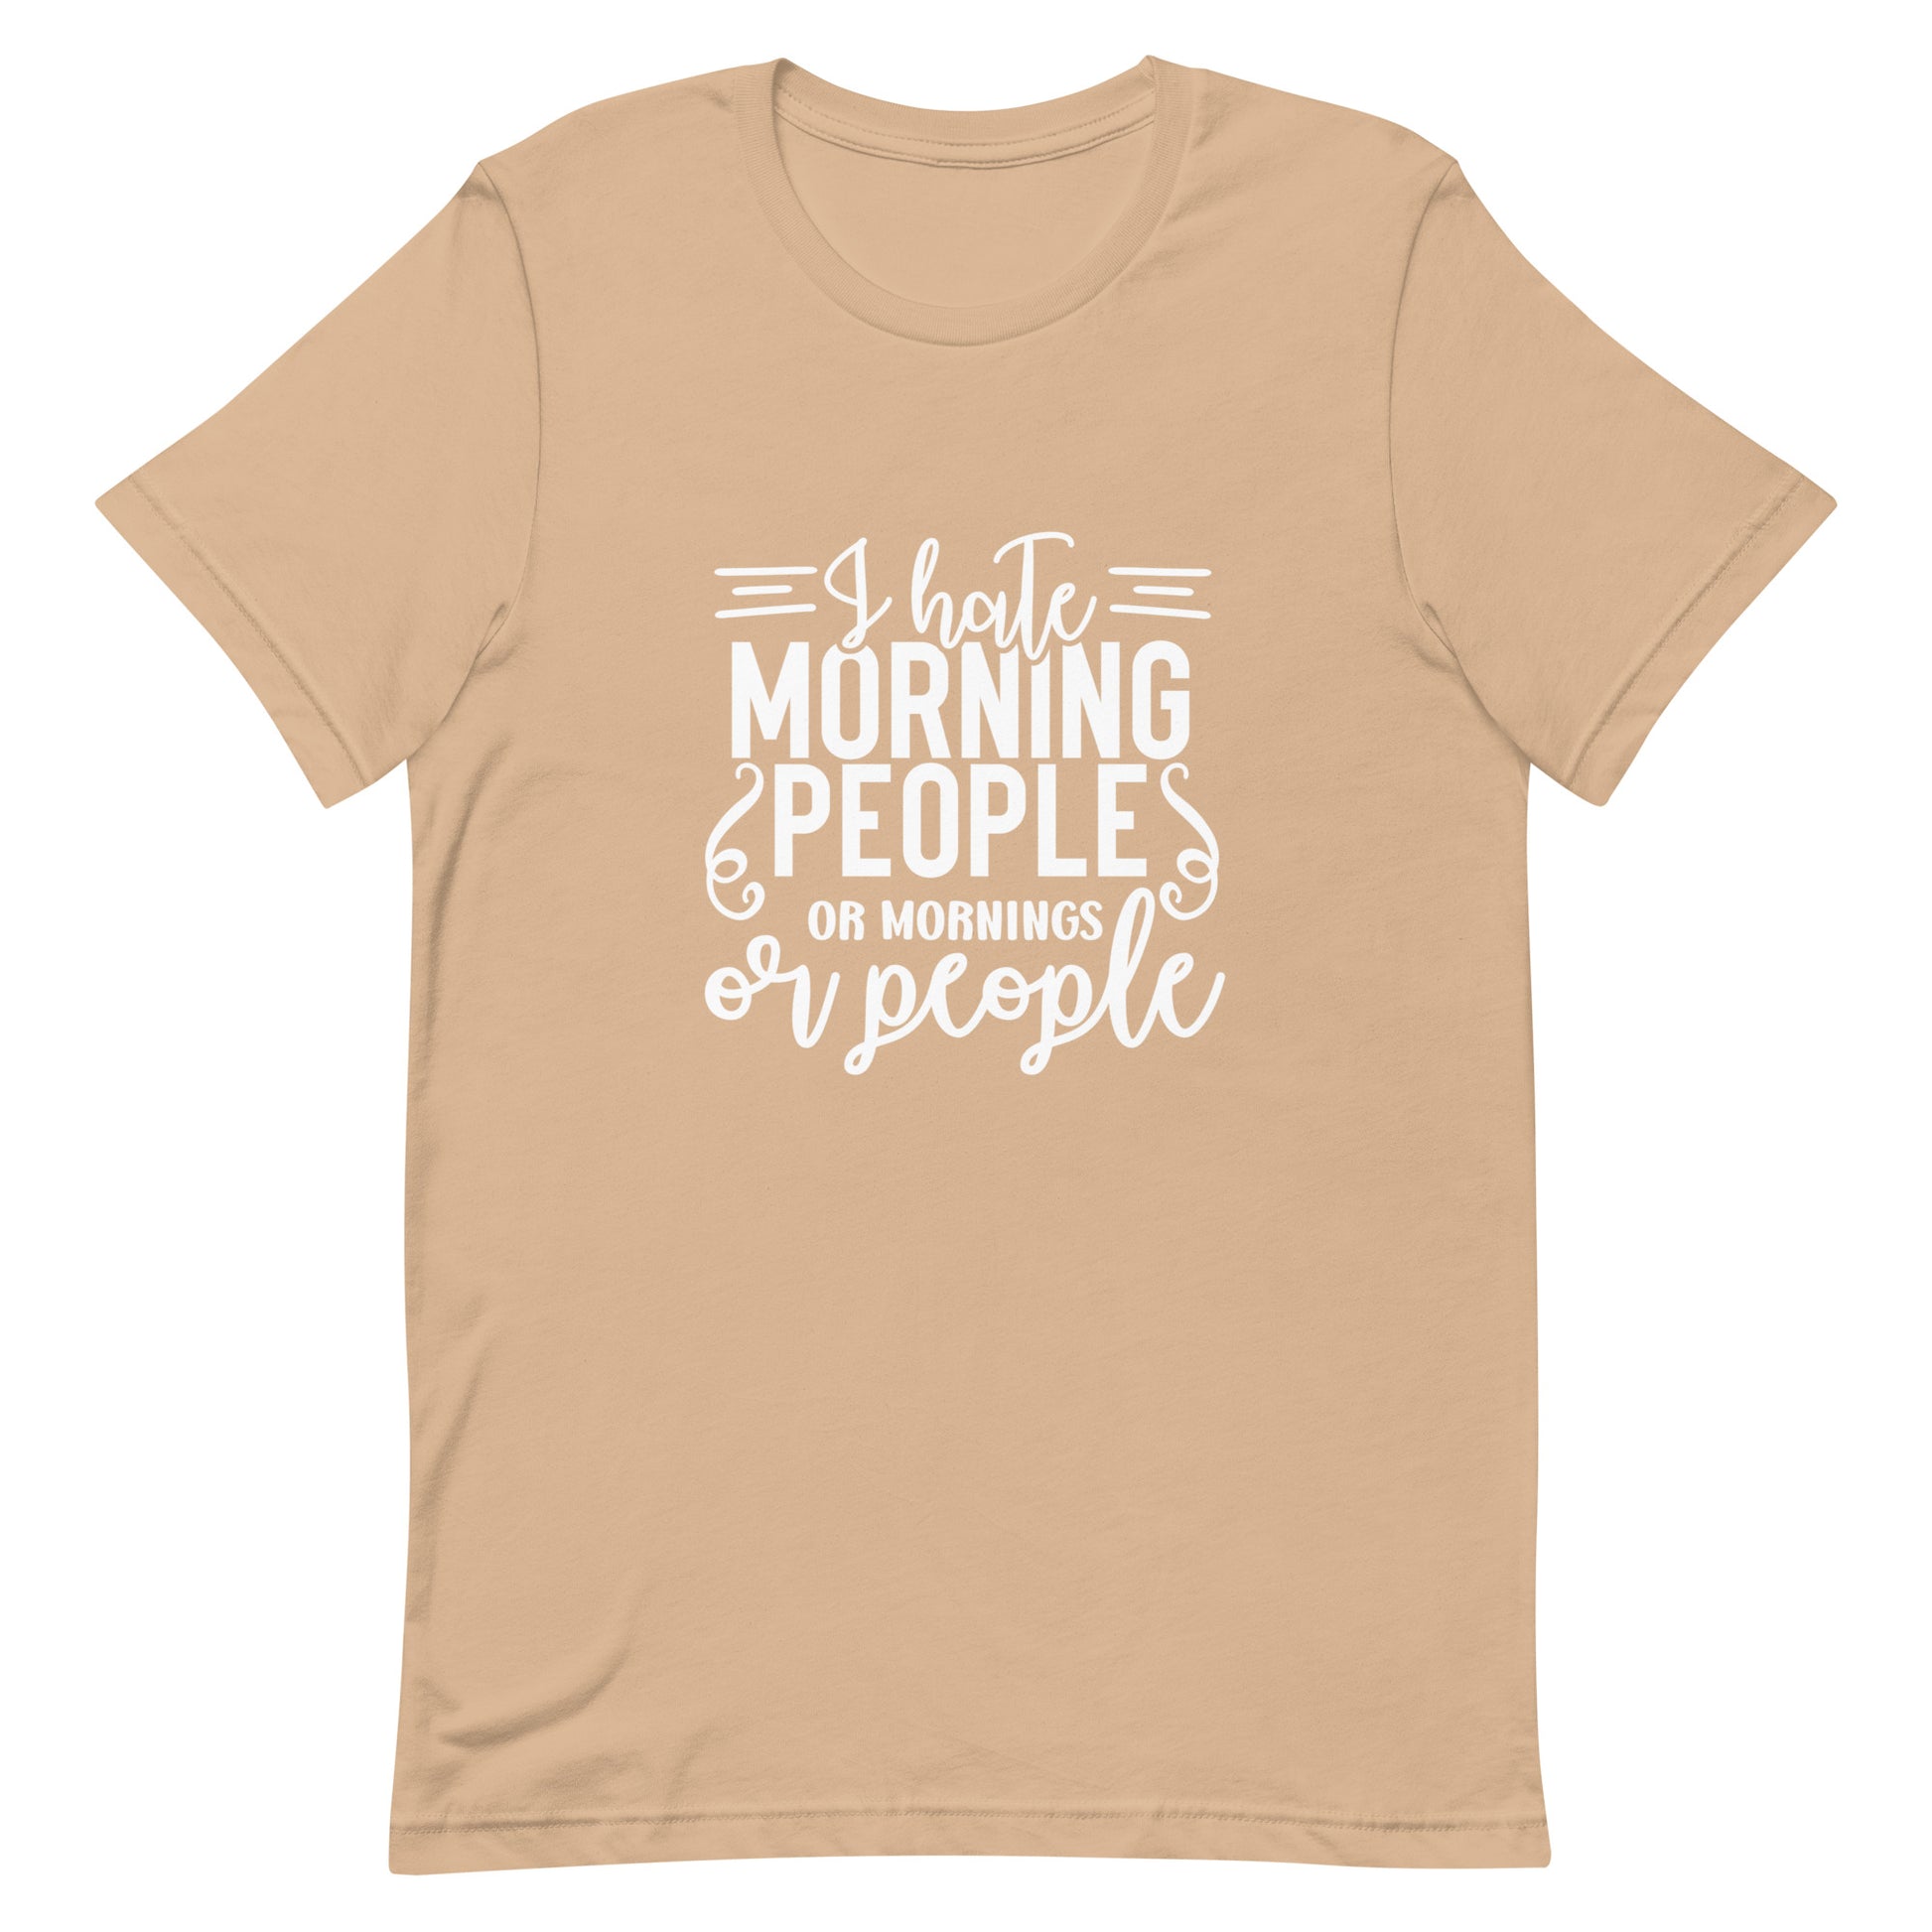 I Hate Morning People or Mornings or People Unisex T-shirt